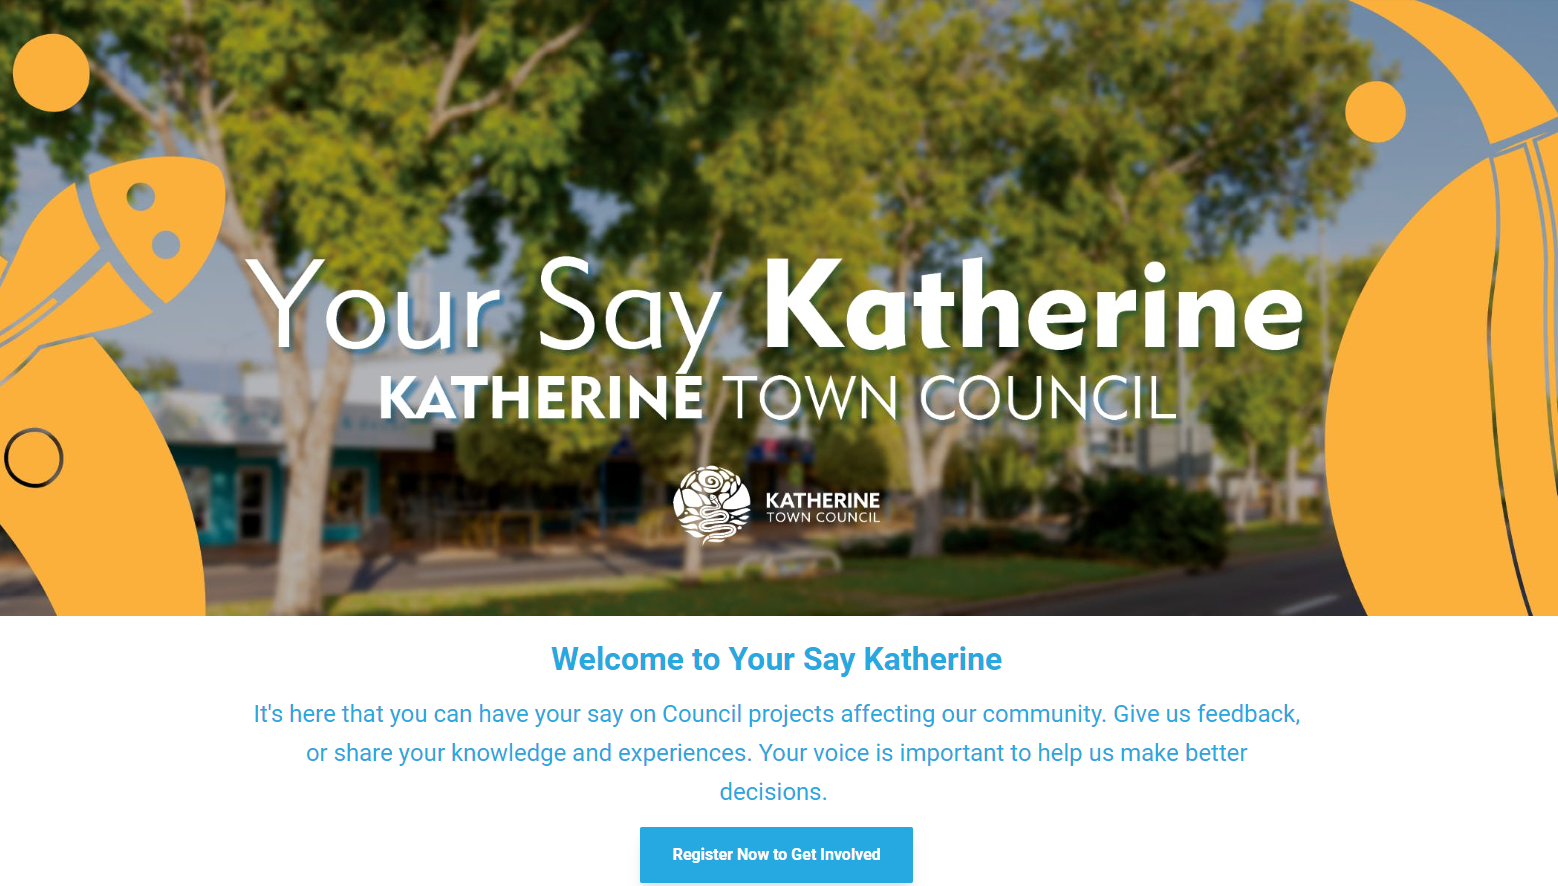 Council Launches Your Say Katherine